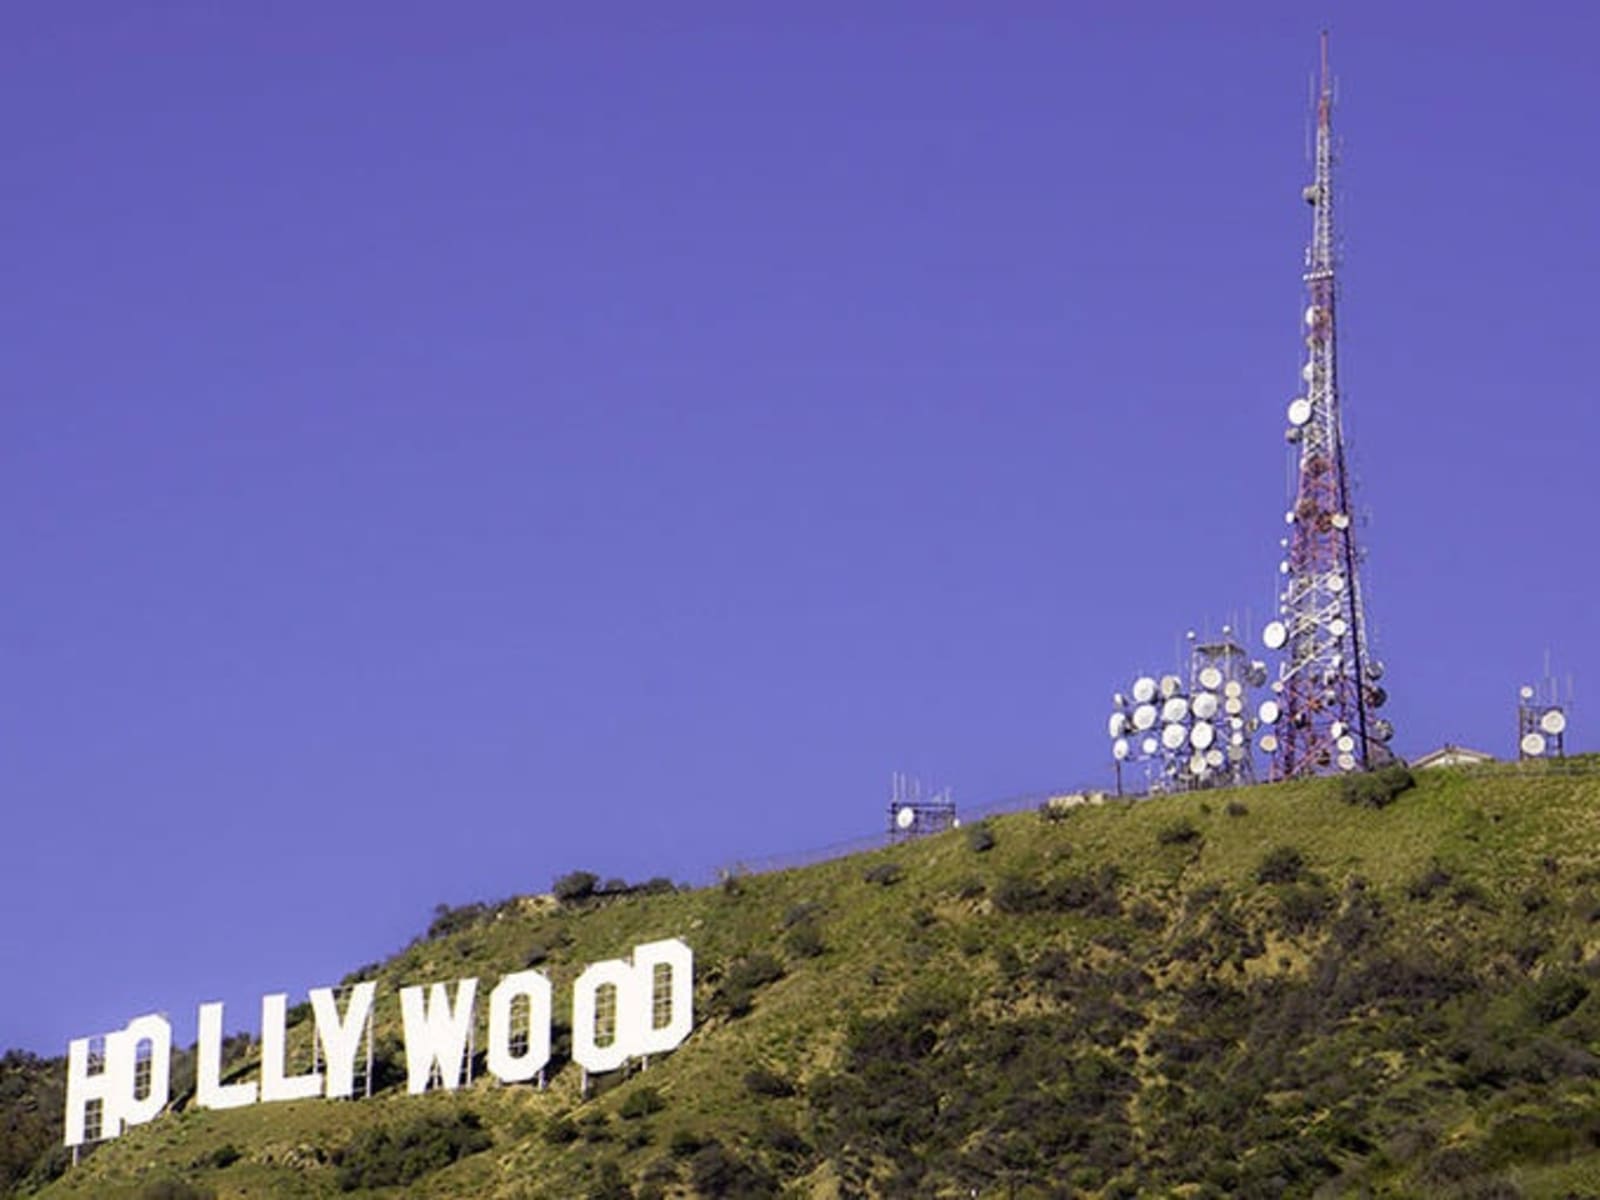 rs-hollywood-sign-shutterstock660037597.jpg